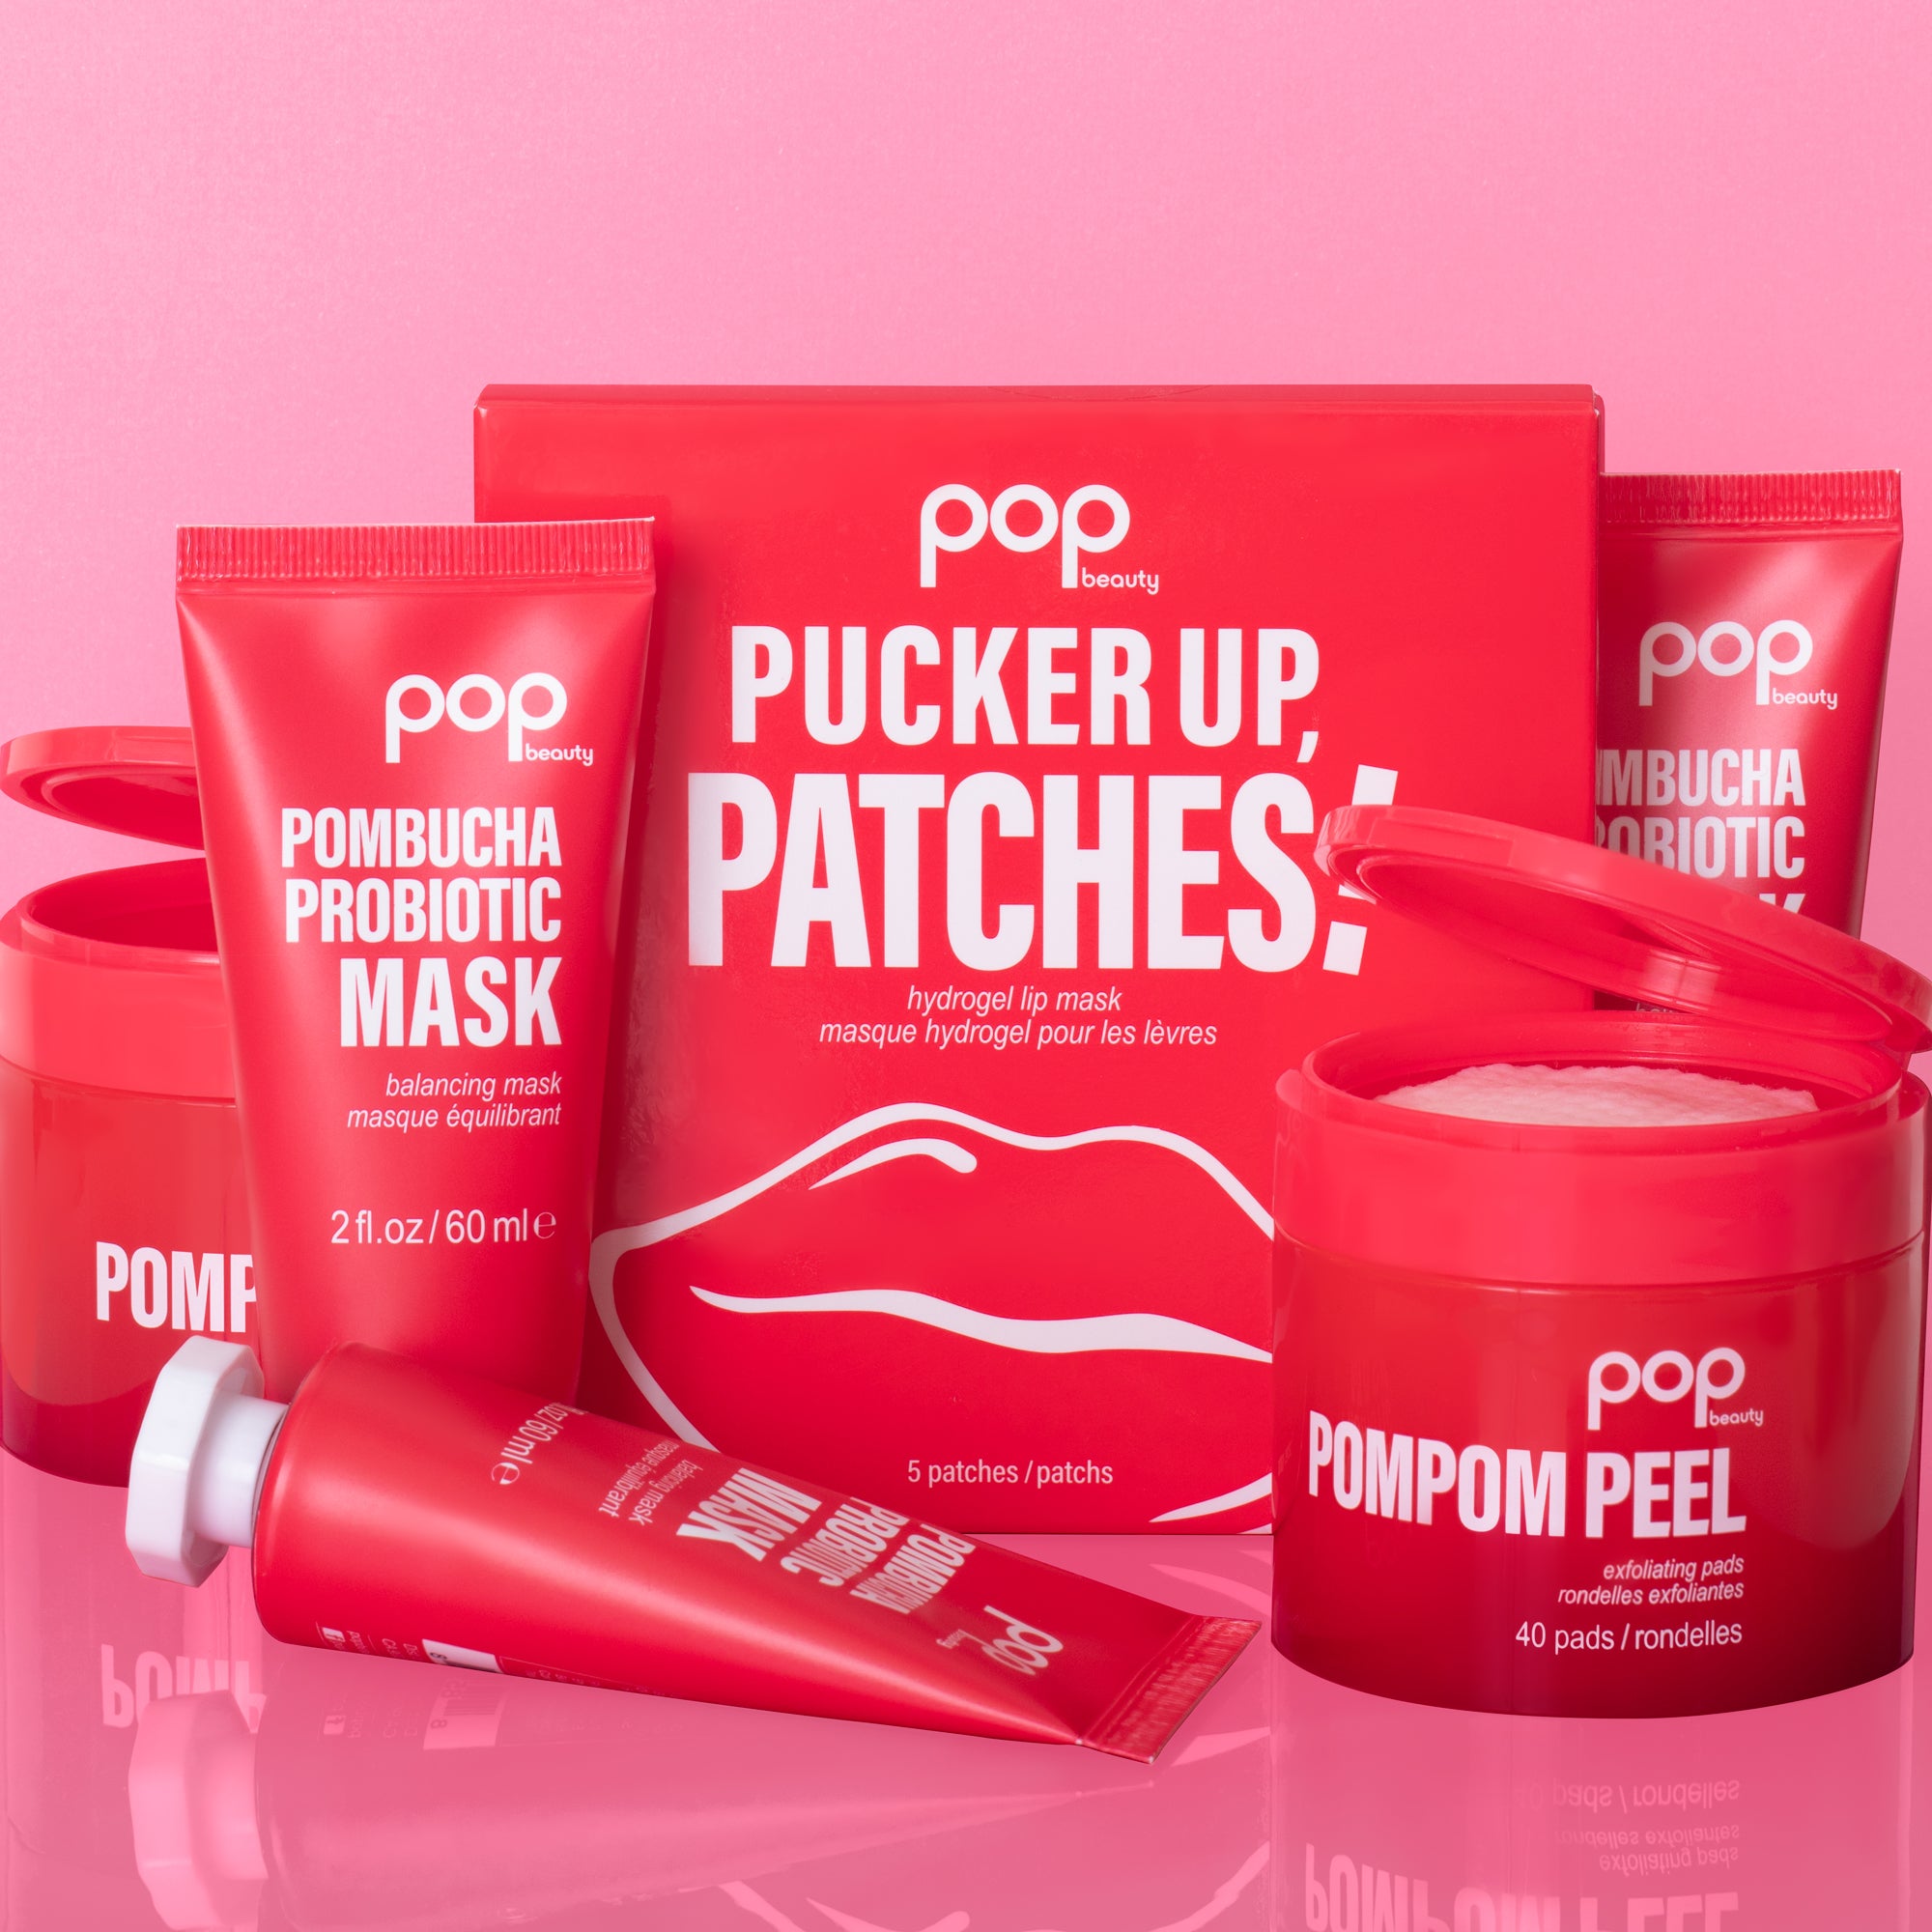 Pucker Up, Patches! – POPbeauty